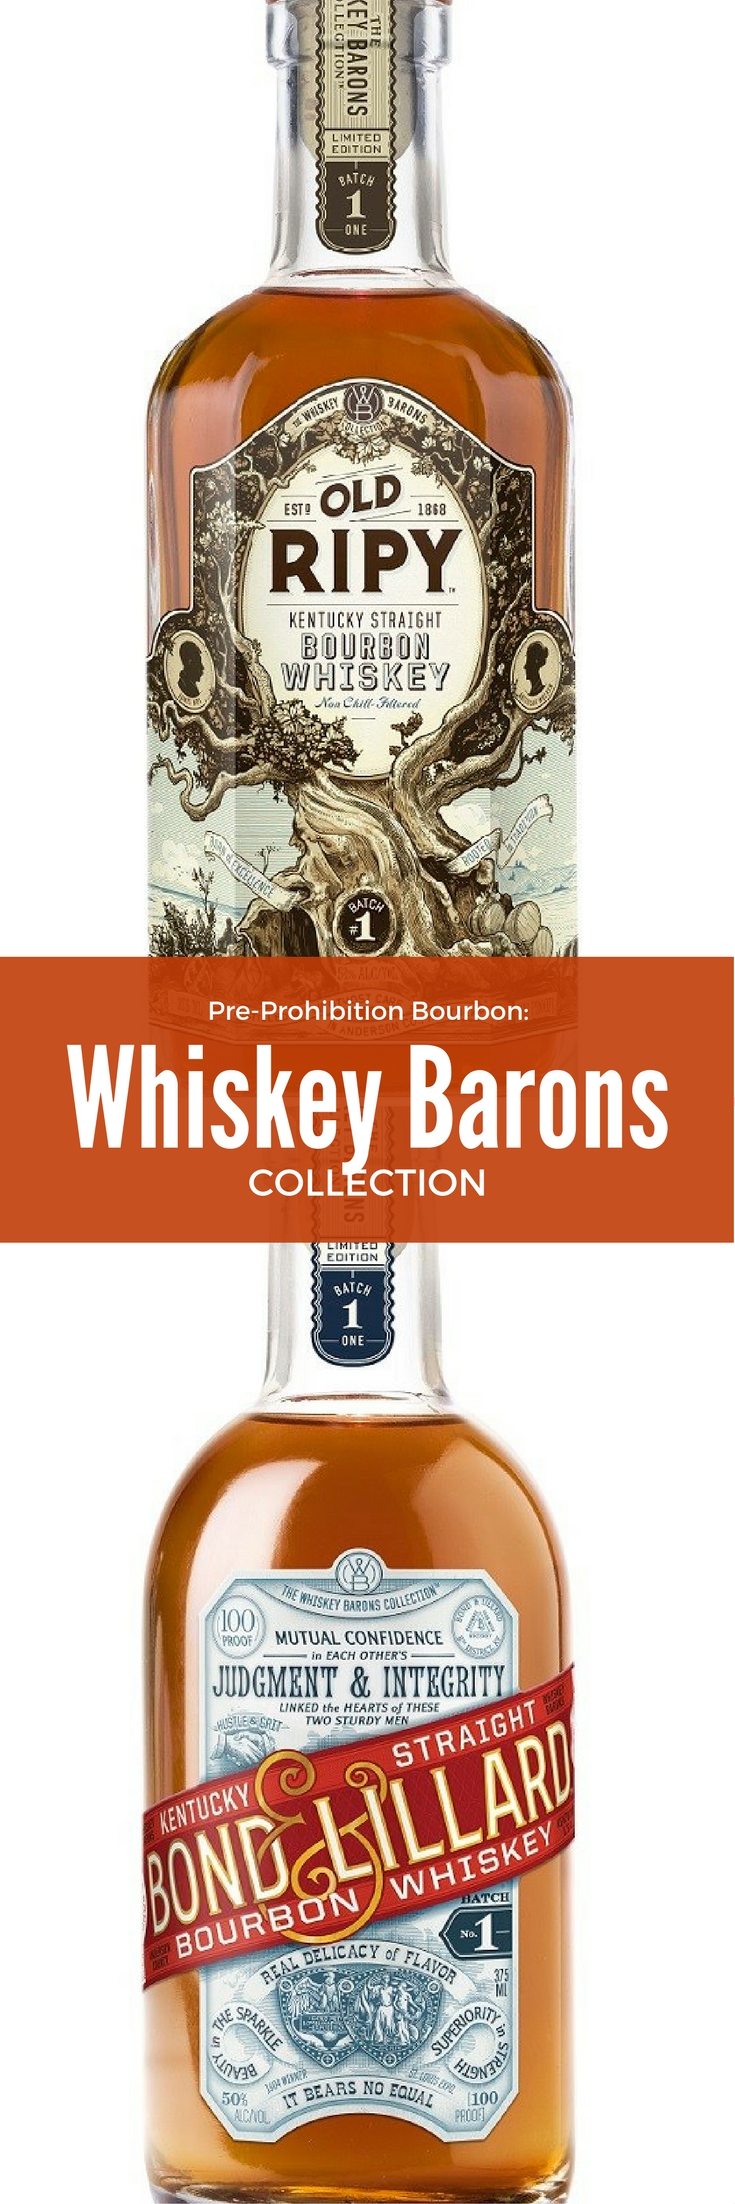 Campari America Launches Whiskey Barons Collection | Bevvy